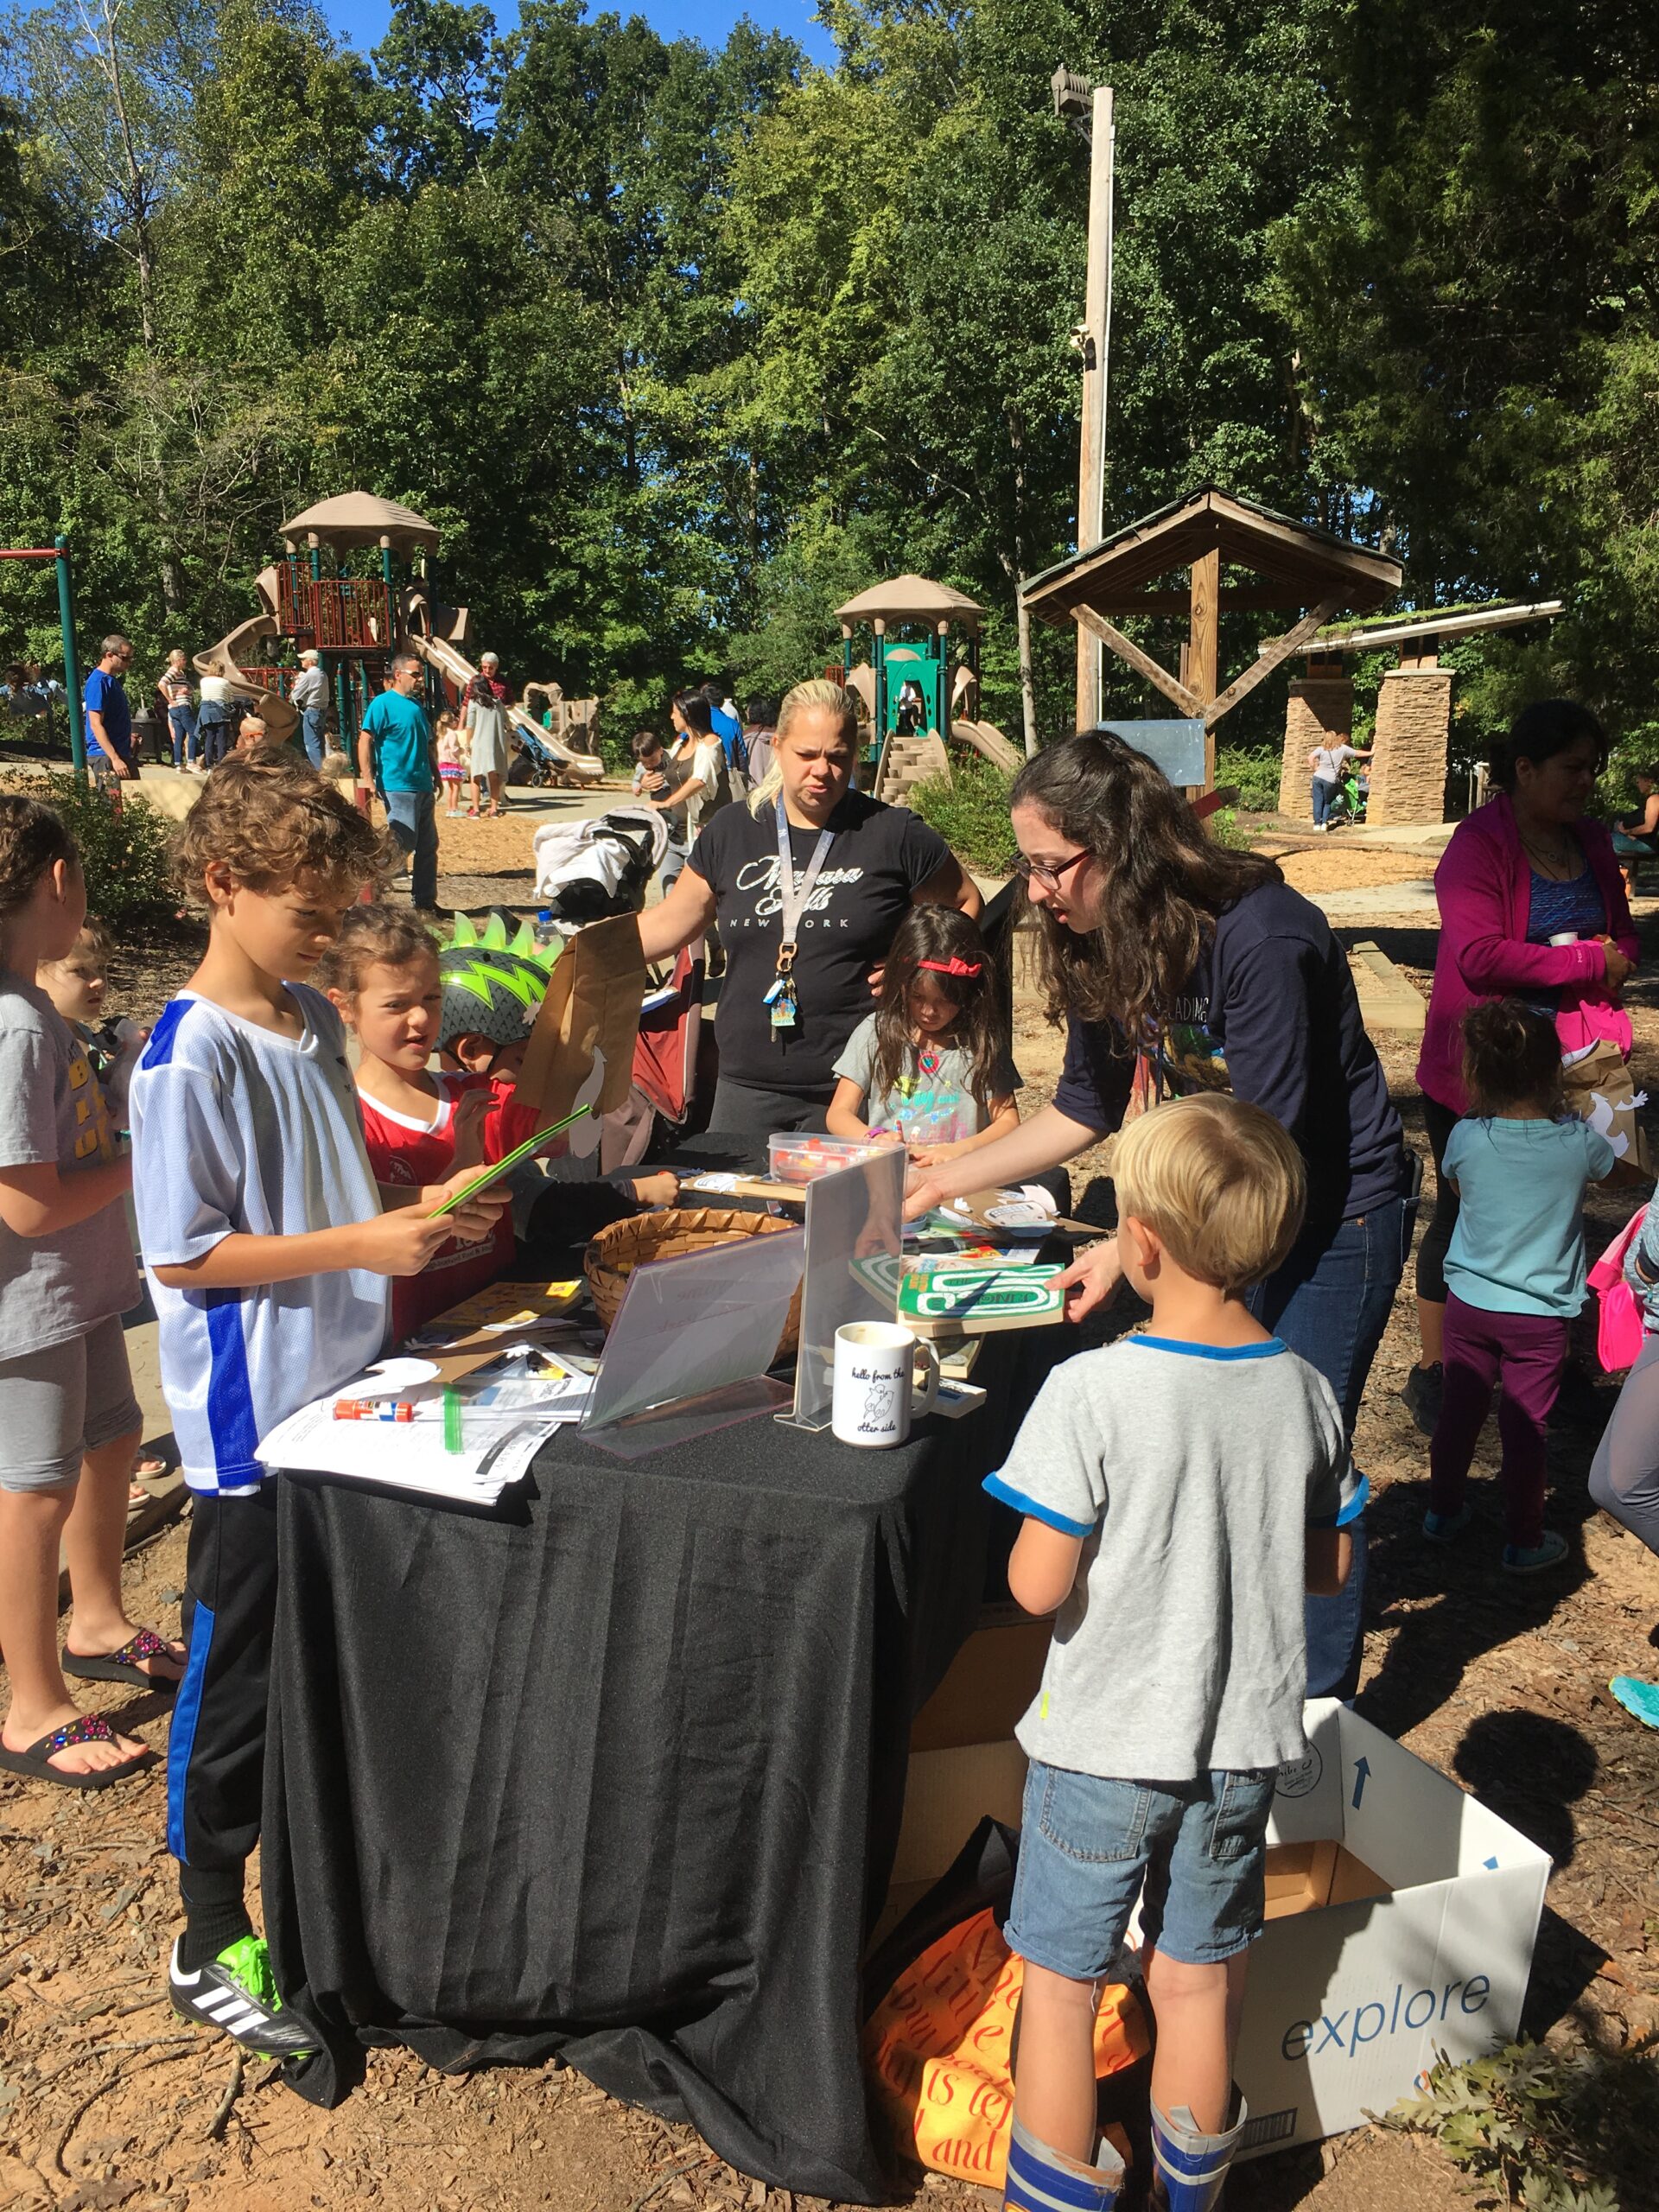 Kids gathering around a learning station at a Kids in Nature Day event.